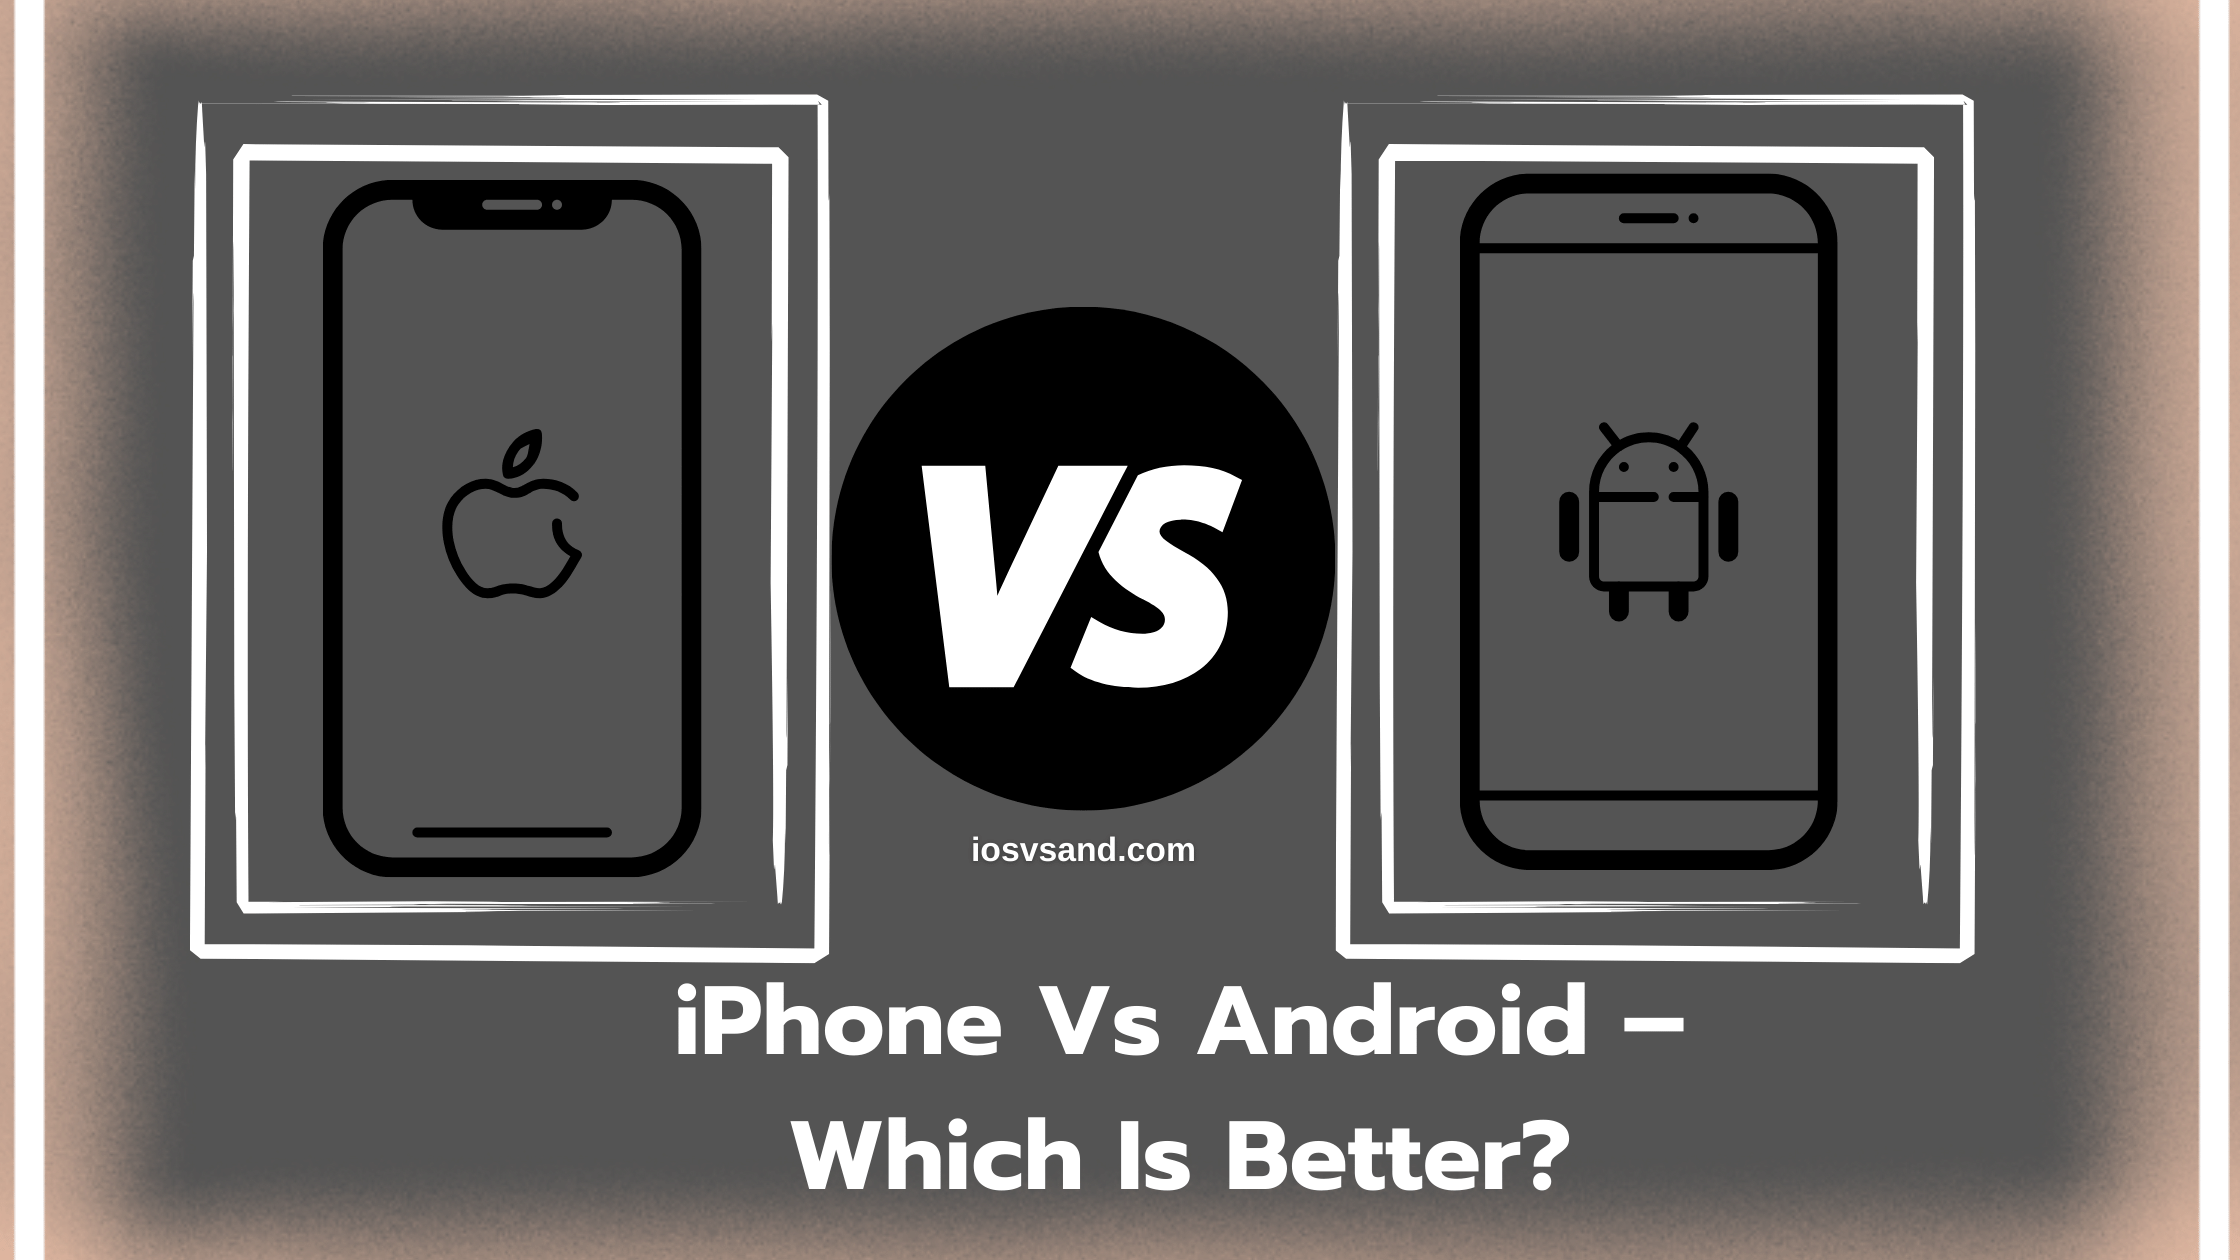 iPhone vs Android: How to decide